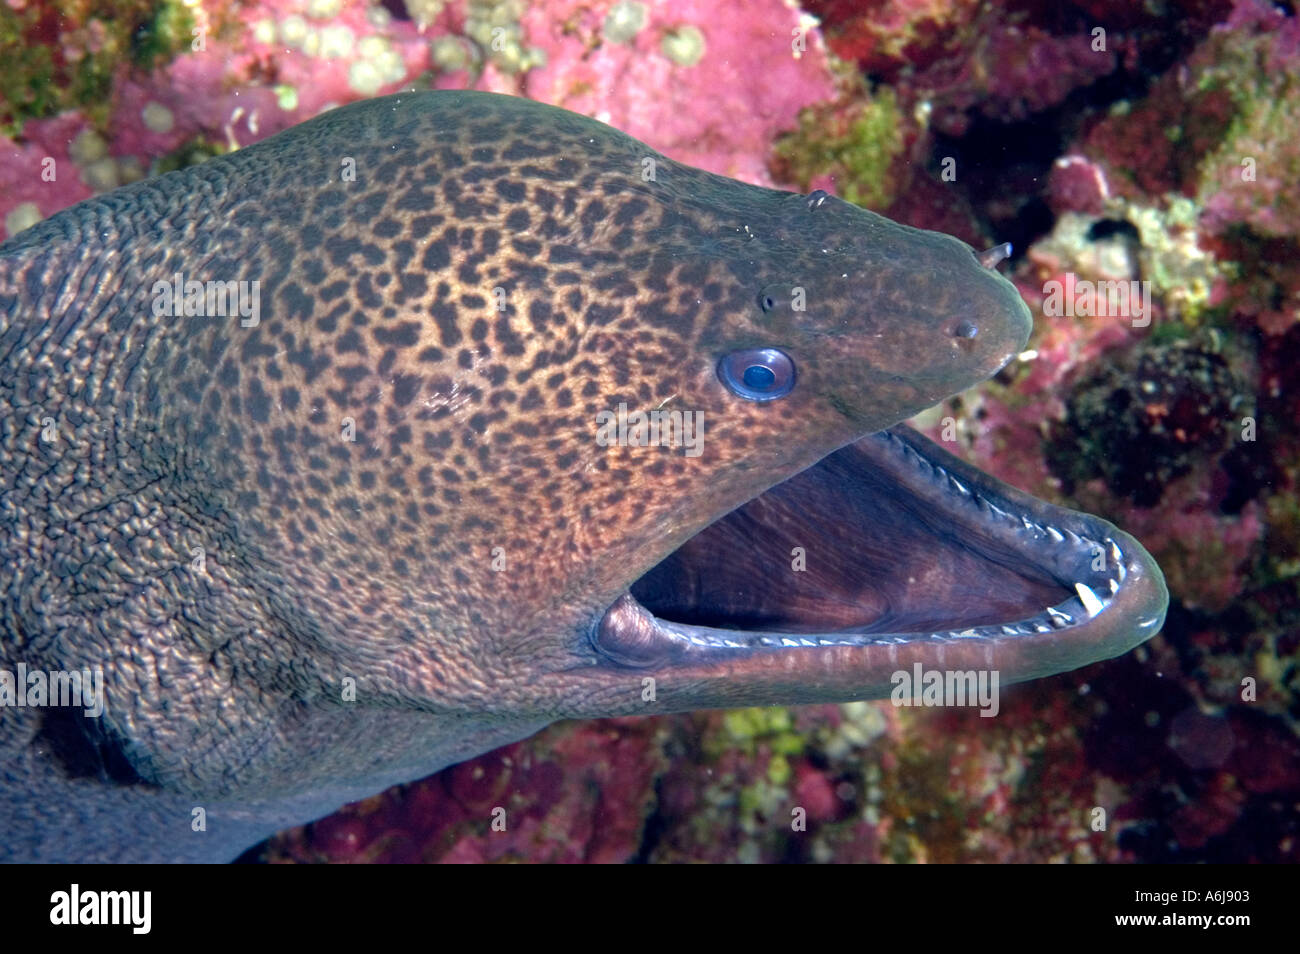 Giant Moray Eel "Gymnothorax javanicus" in the Southerrn Red Sea, Egypt Stock Photo